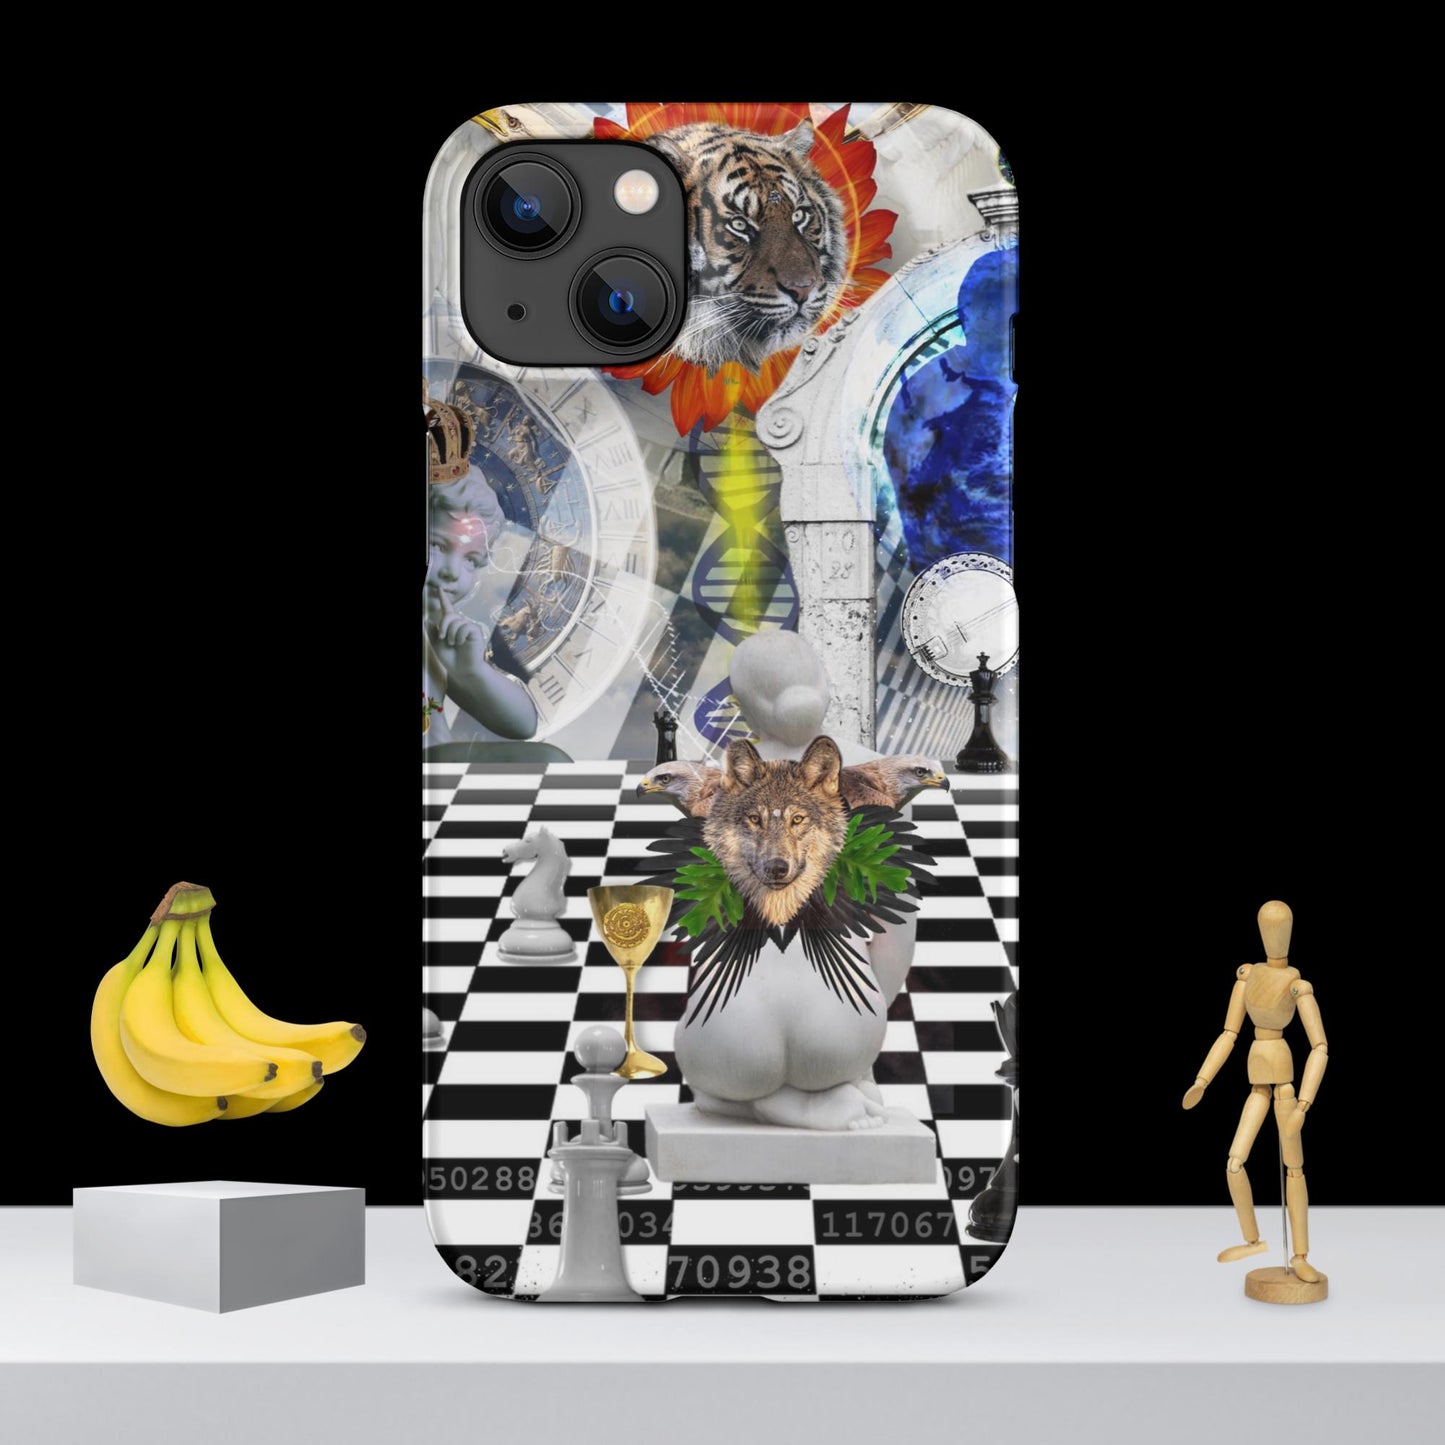 2 of Cups - Snap case for iPhone®  - Custom Design - Beacon of Hope and Light Artworks